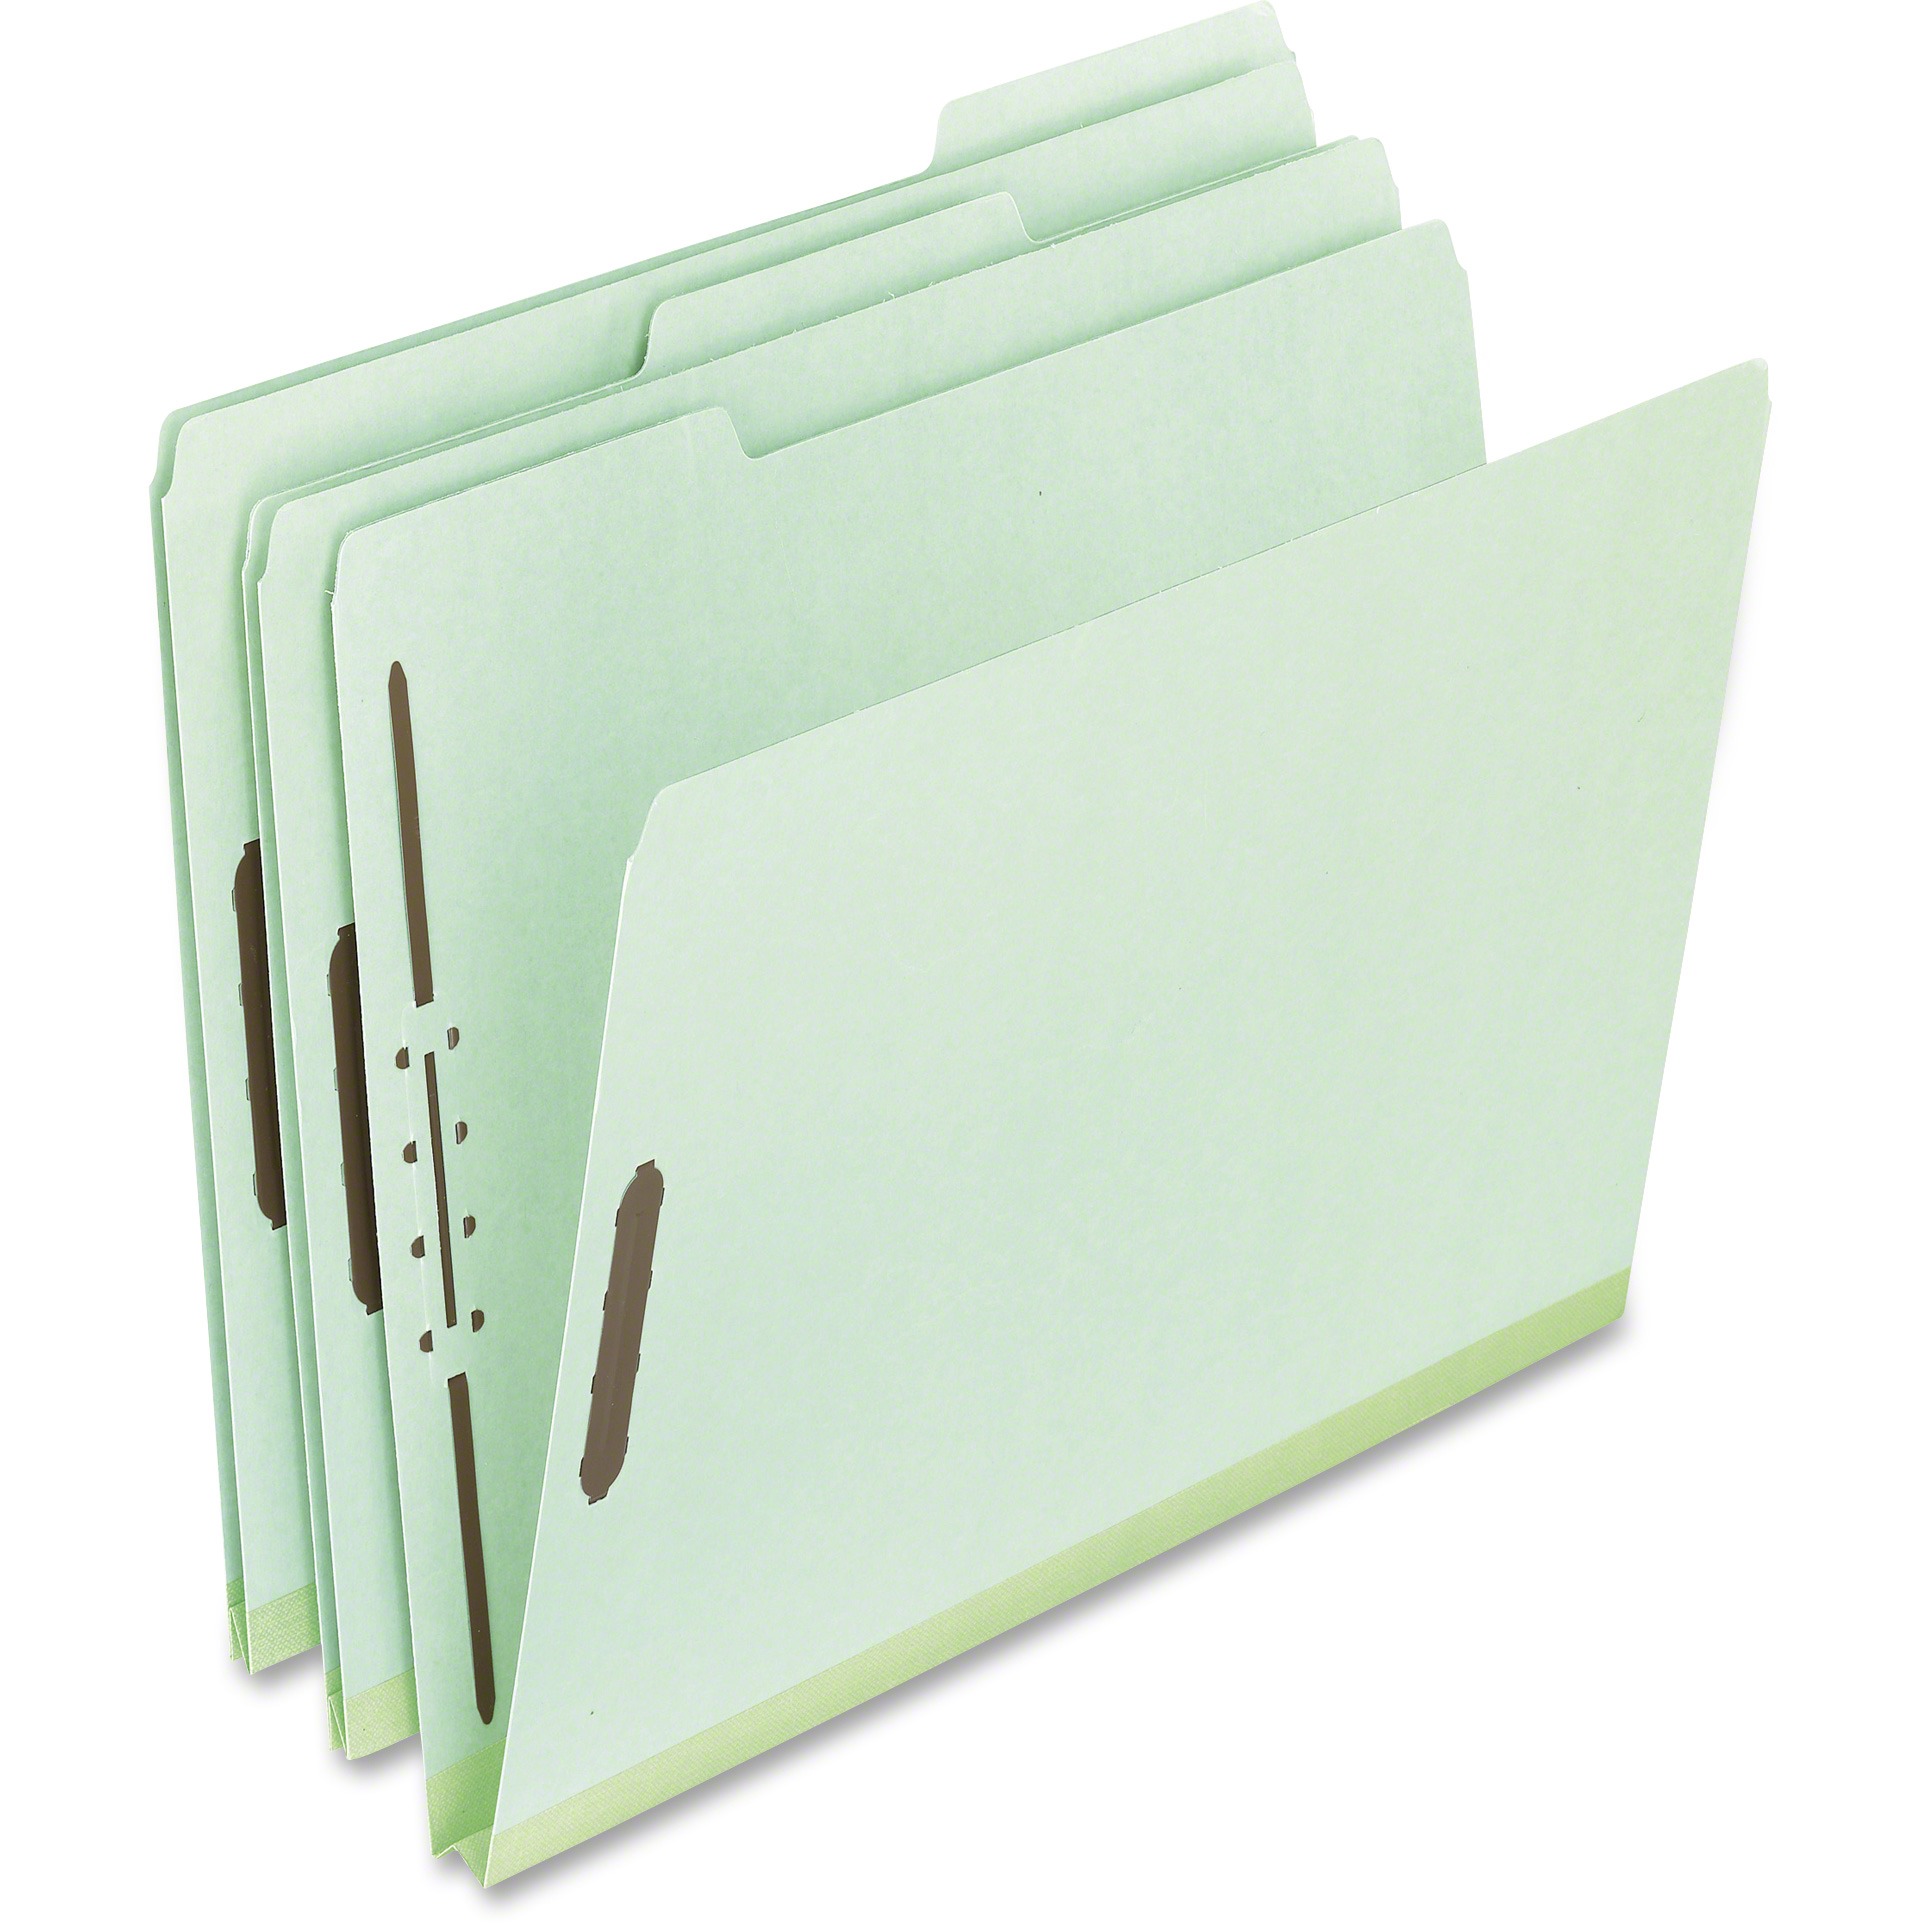 Pendaflex Pressboard Folders with Fastener - 8 1/2" x 11" - 1" Expansion - 2 Fastener(s) - Top Tab Location - Assorted Position 